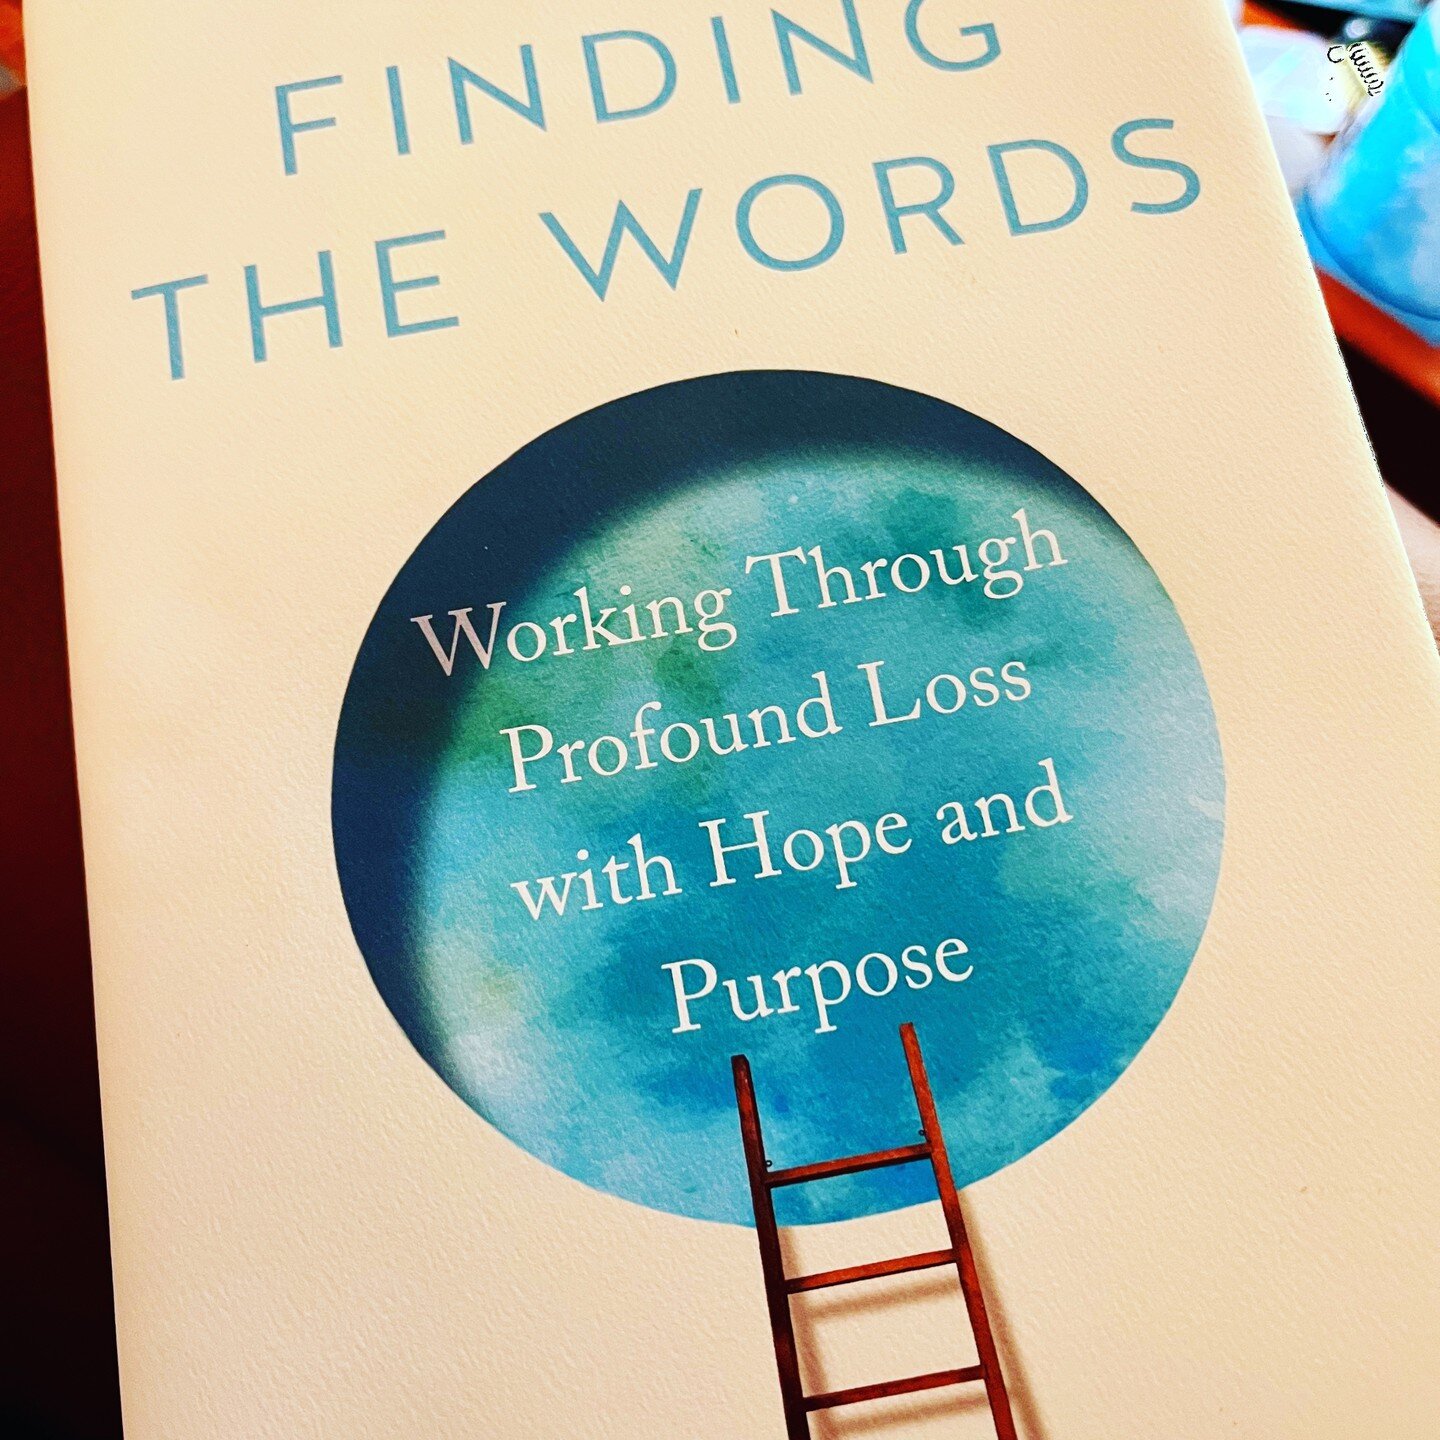 Navigating a path forward through the uncharted territory of child loss grief deserves company and community!

&quot;Finding the Words: Working Through Profound Loss with Hope and Purpose&quot; by @colincampbellwriter

#whatimreading 
#childlossgrief